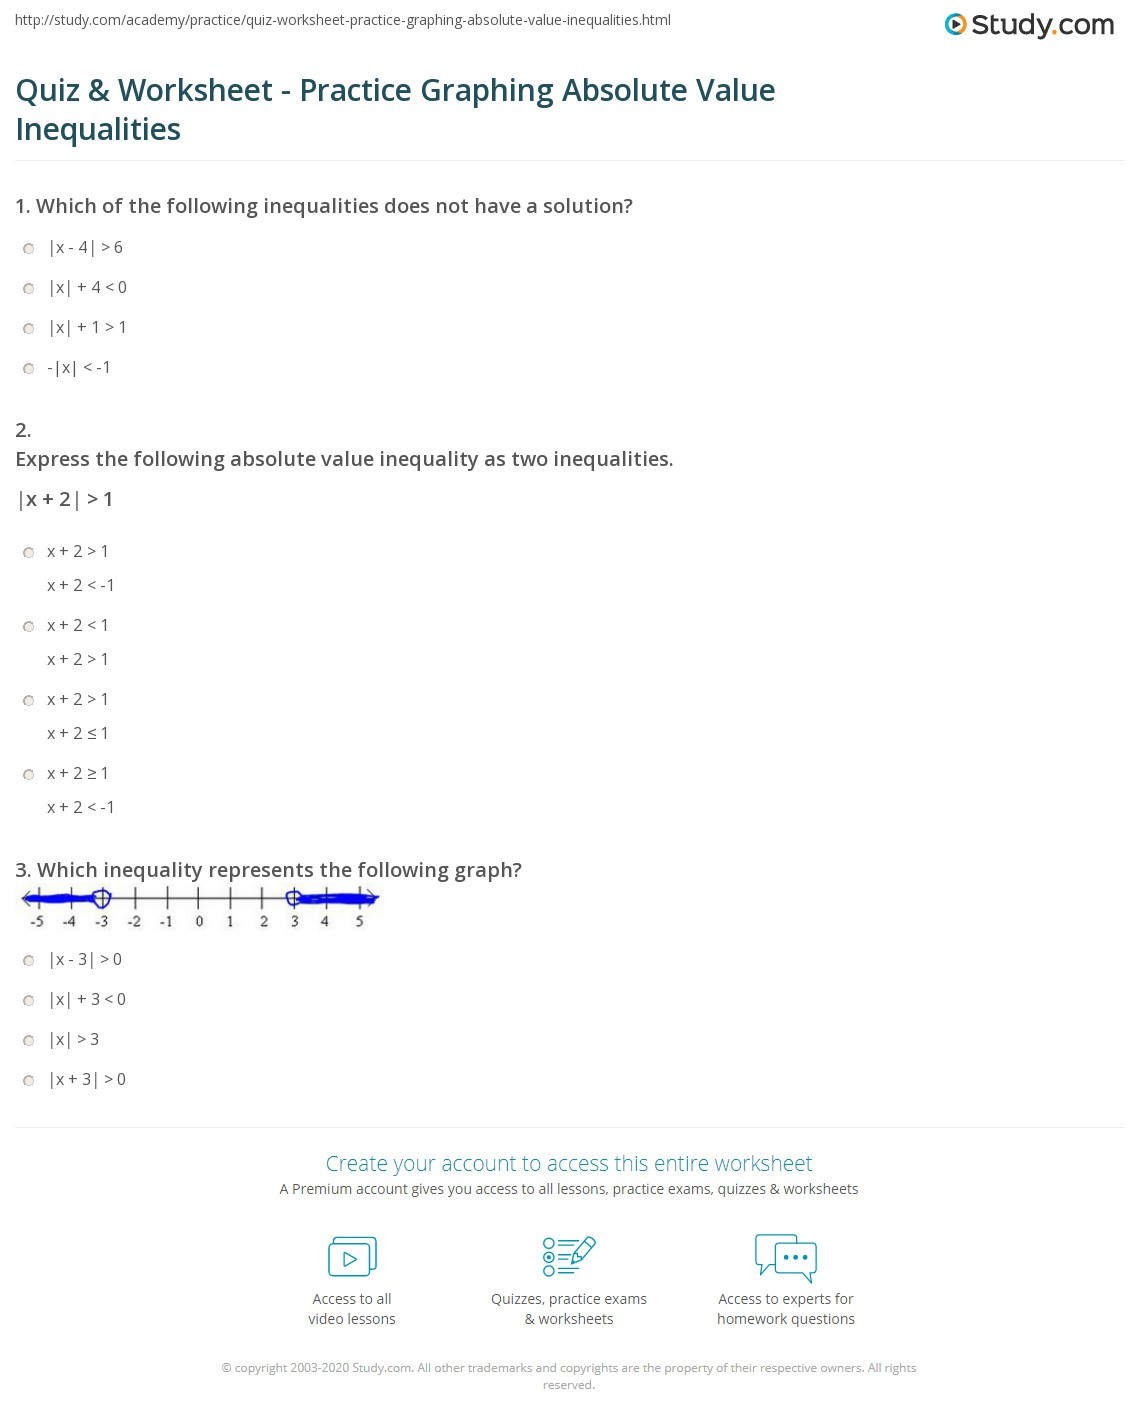 Graphing Absolute Value Equations Worksheet Quiz &amp; Worksheet Practice Graphing Absolute Value